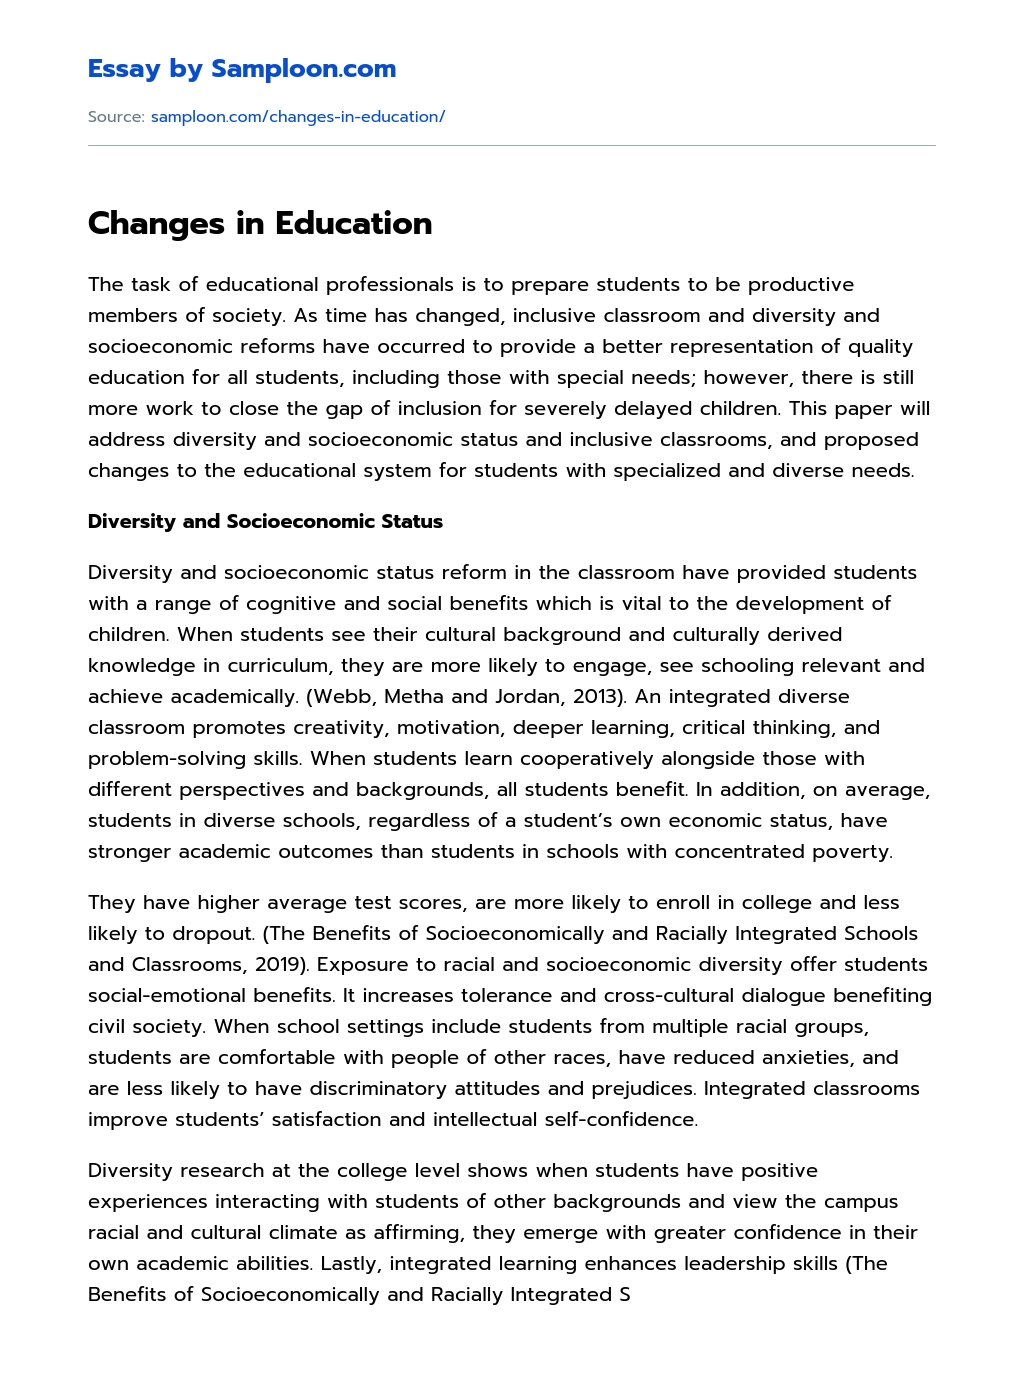 Changes in Education essay